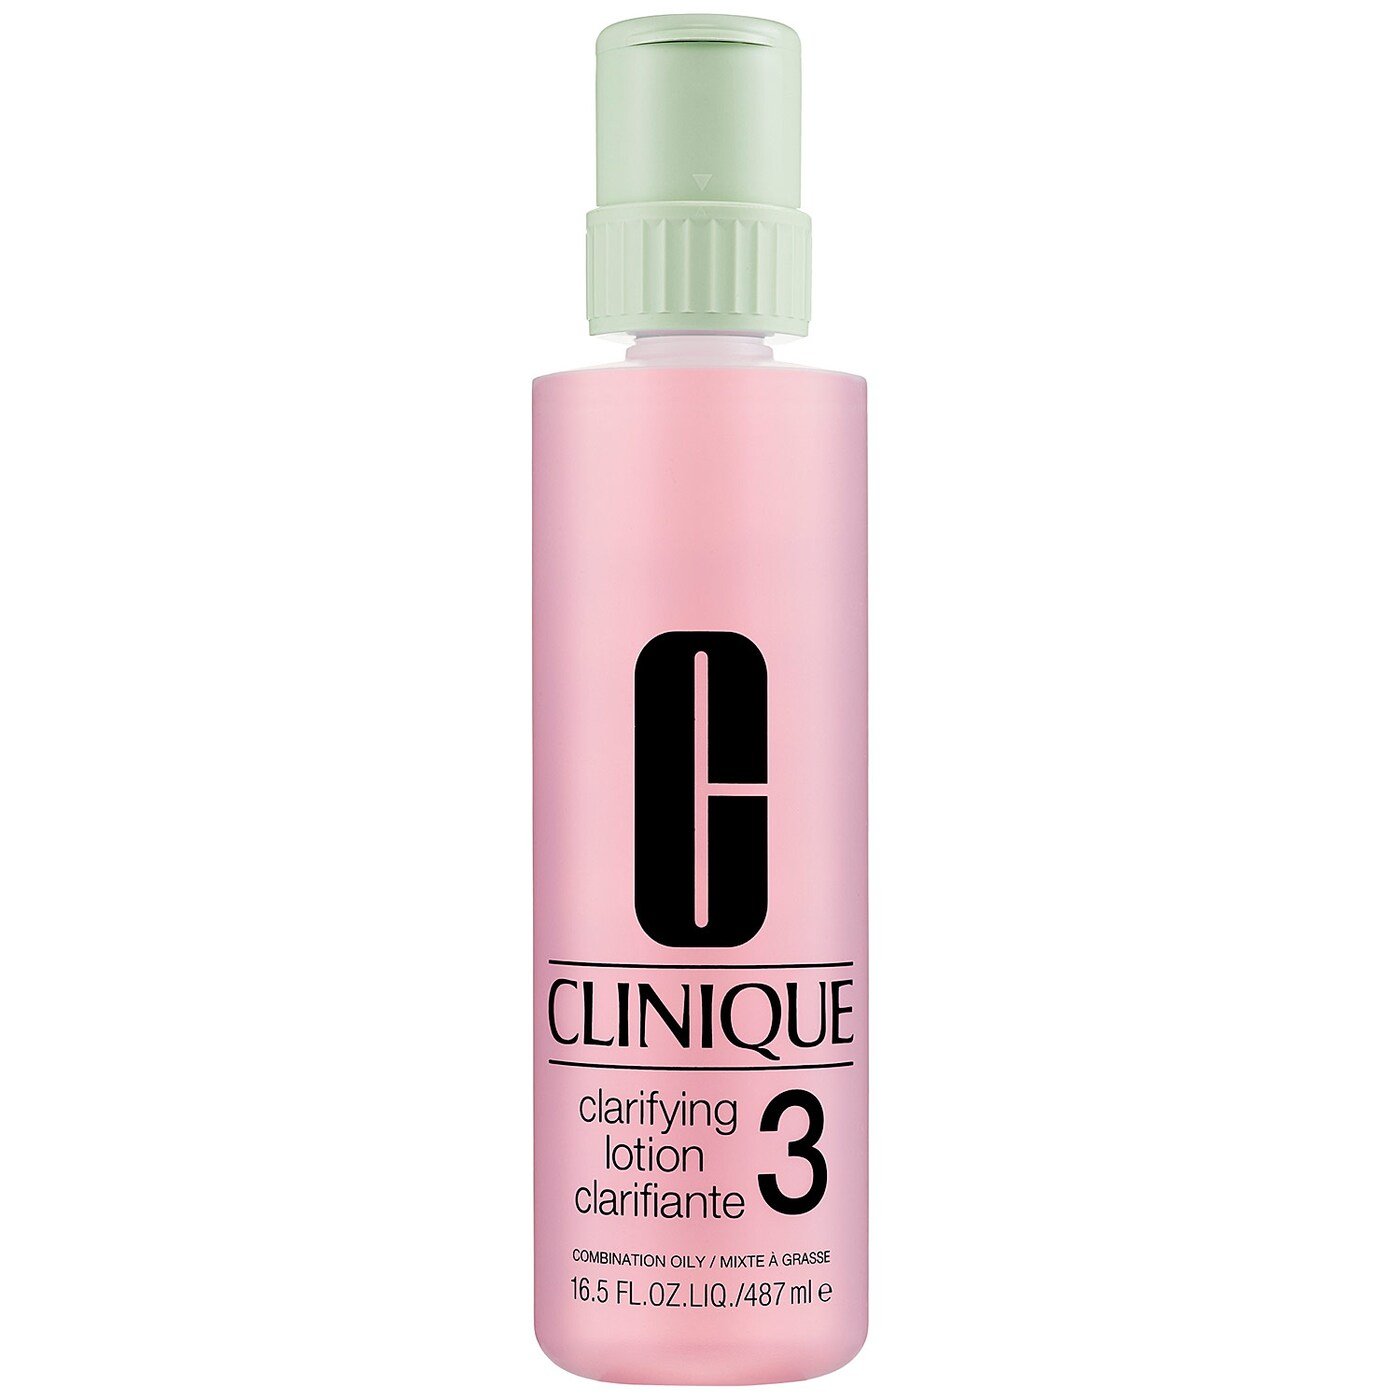 Clinique Clarifying Lotion 3 Twice A Day Exfloator 487Ml - AllurebeautypkClinique Clarifying Lotion 3 Twice A Day Exfloator 487Ml